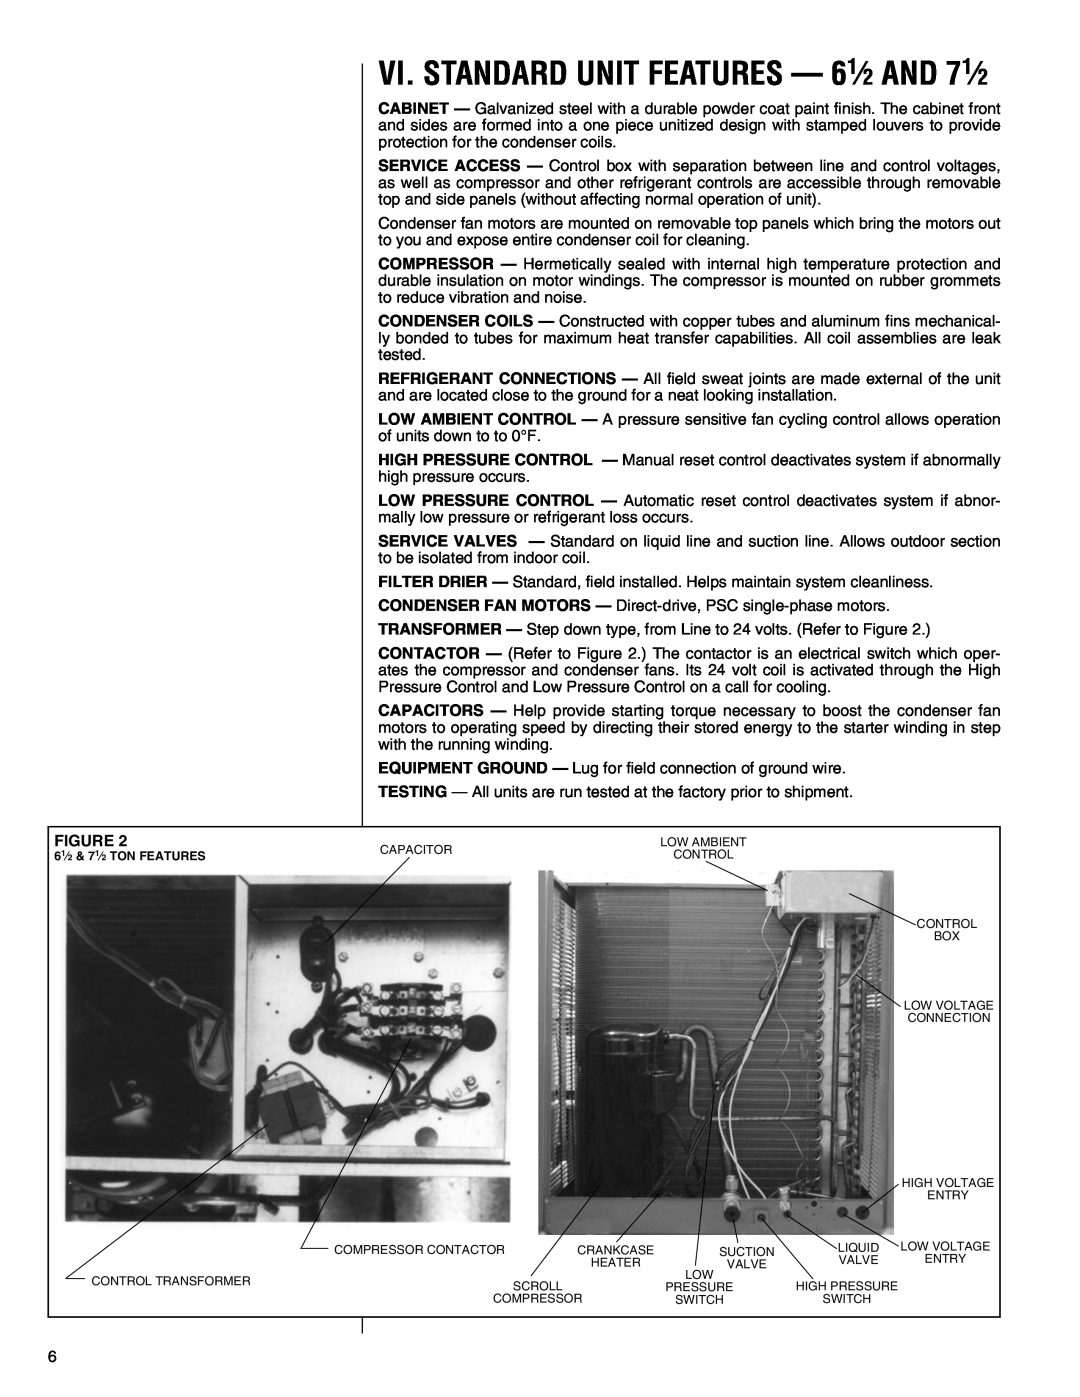 Heat Controller R-410A installation instructions VI. STANDARD UNIT FEATURES - 61⁄2 AND 71⁄2 